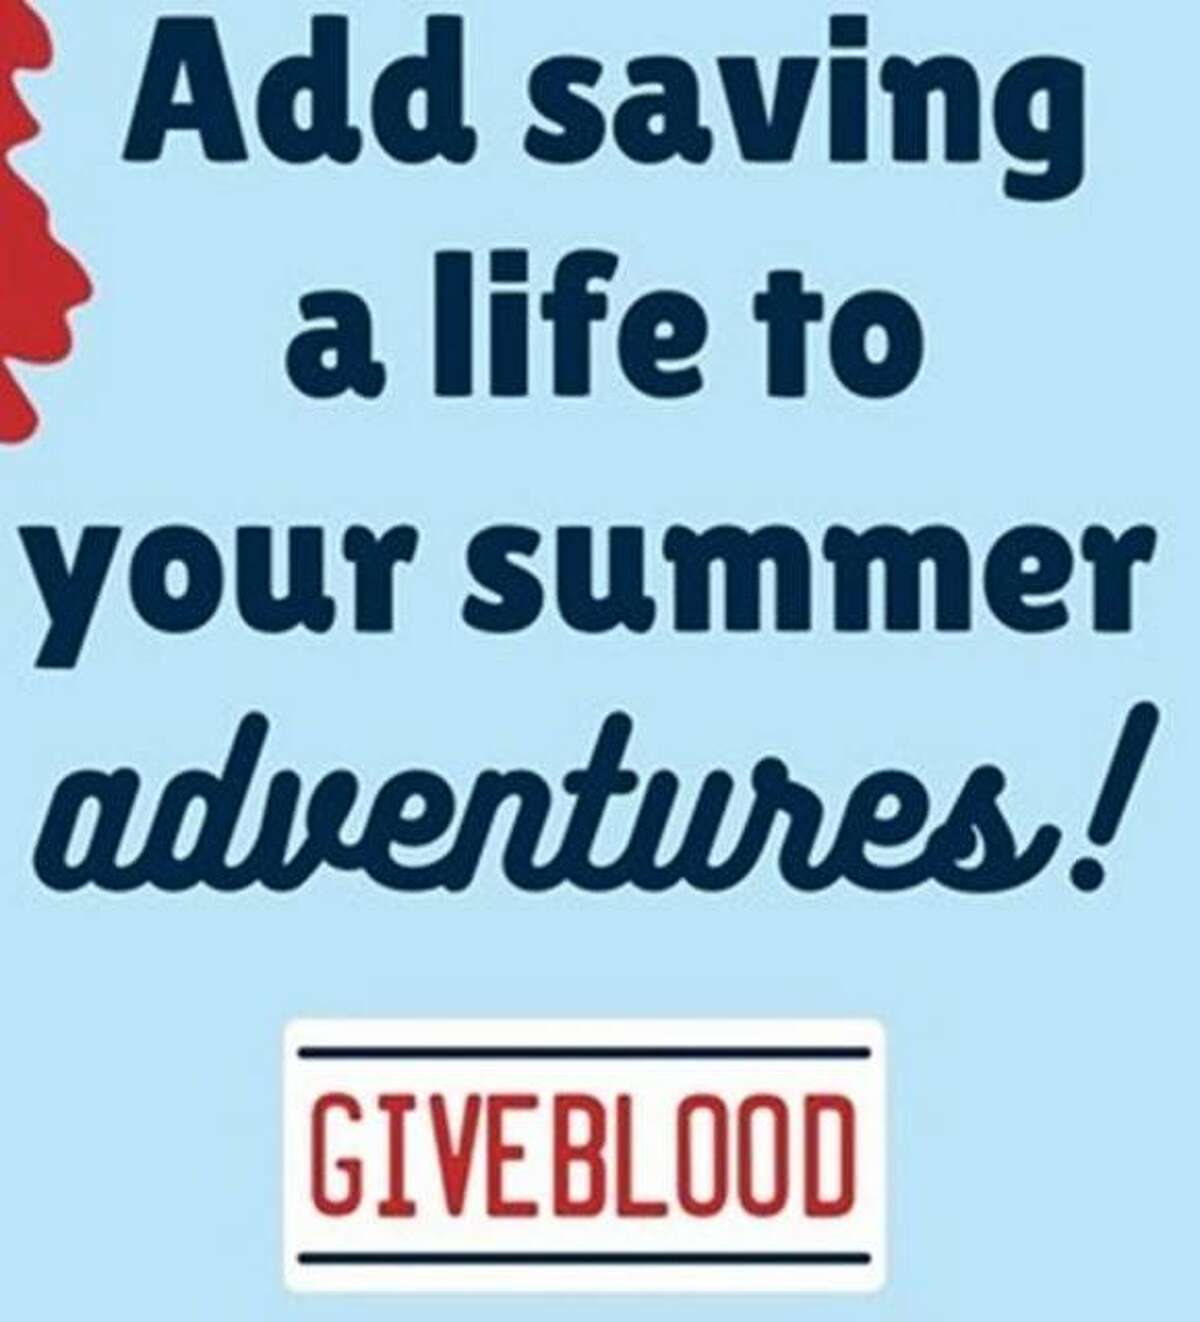 This Friday give some blood at the blood drive from 8 a.m.-5 p.m. hosted by the village of East Alton in conjunction with The Blood Center to supply local hospitals with much needed blood supply. Masks and appointments are required to visit the Donor Bus at 119 W. Main St. To schedule an appointment, call The Blood Center at 800-747-5401 or visit www.bloodcenter.org. Use sponsor code 11248 to schedule online.